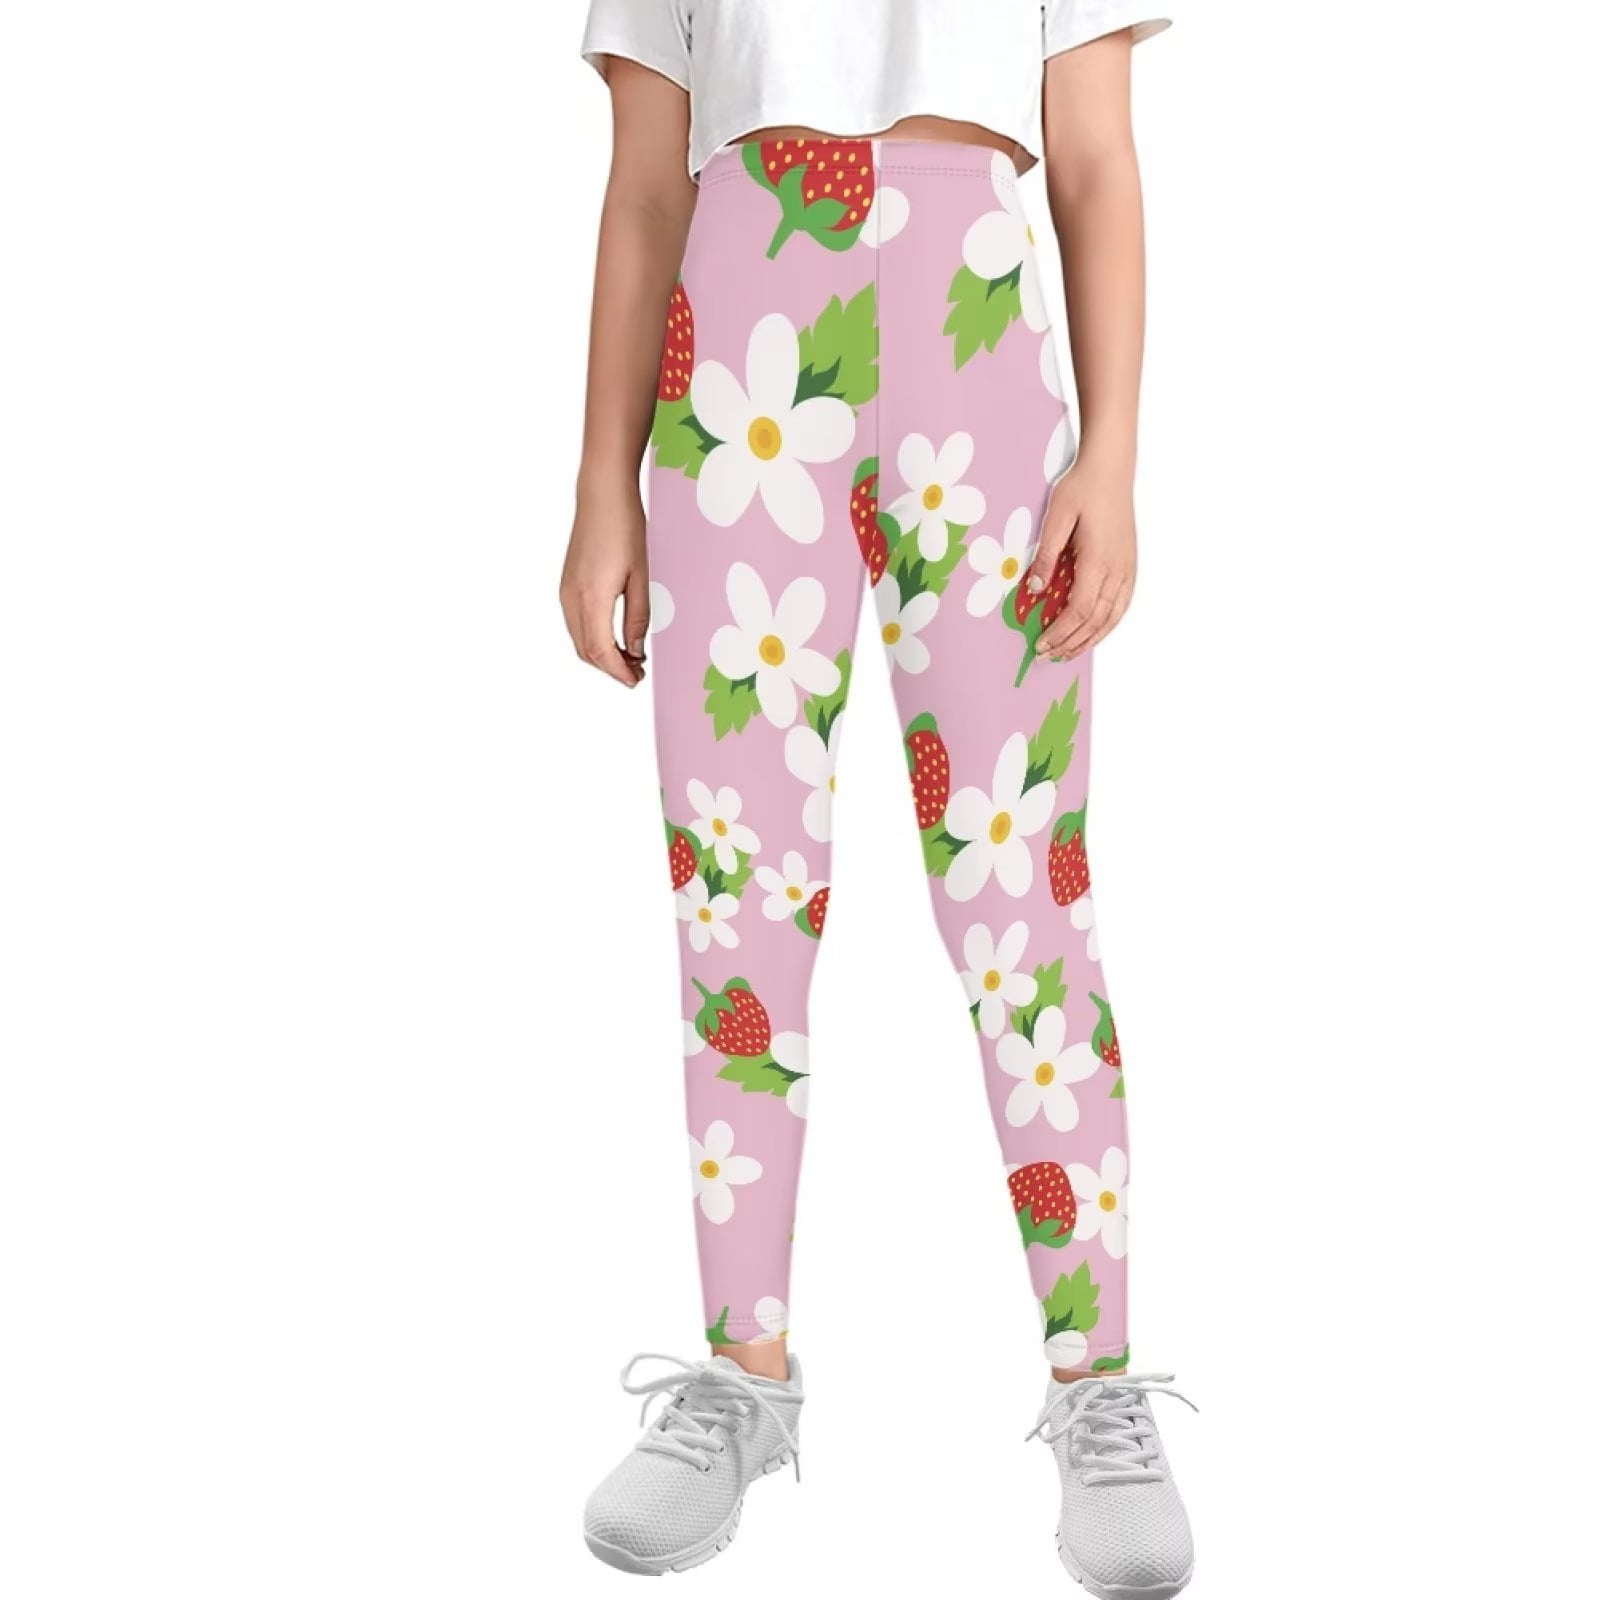 FKELYI Strawberry Floral Girls Leggings Size 12-13 Years Comfortable Going  Out Yoga Pants Soft Playing High Waisted Tights for Teen Kids